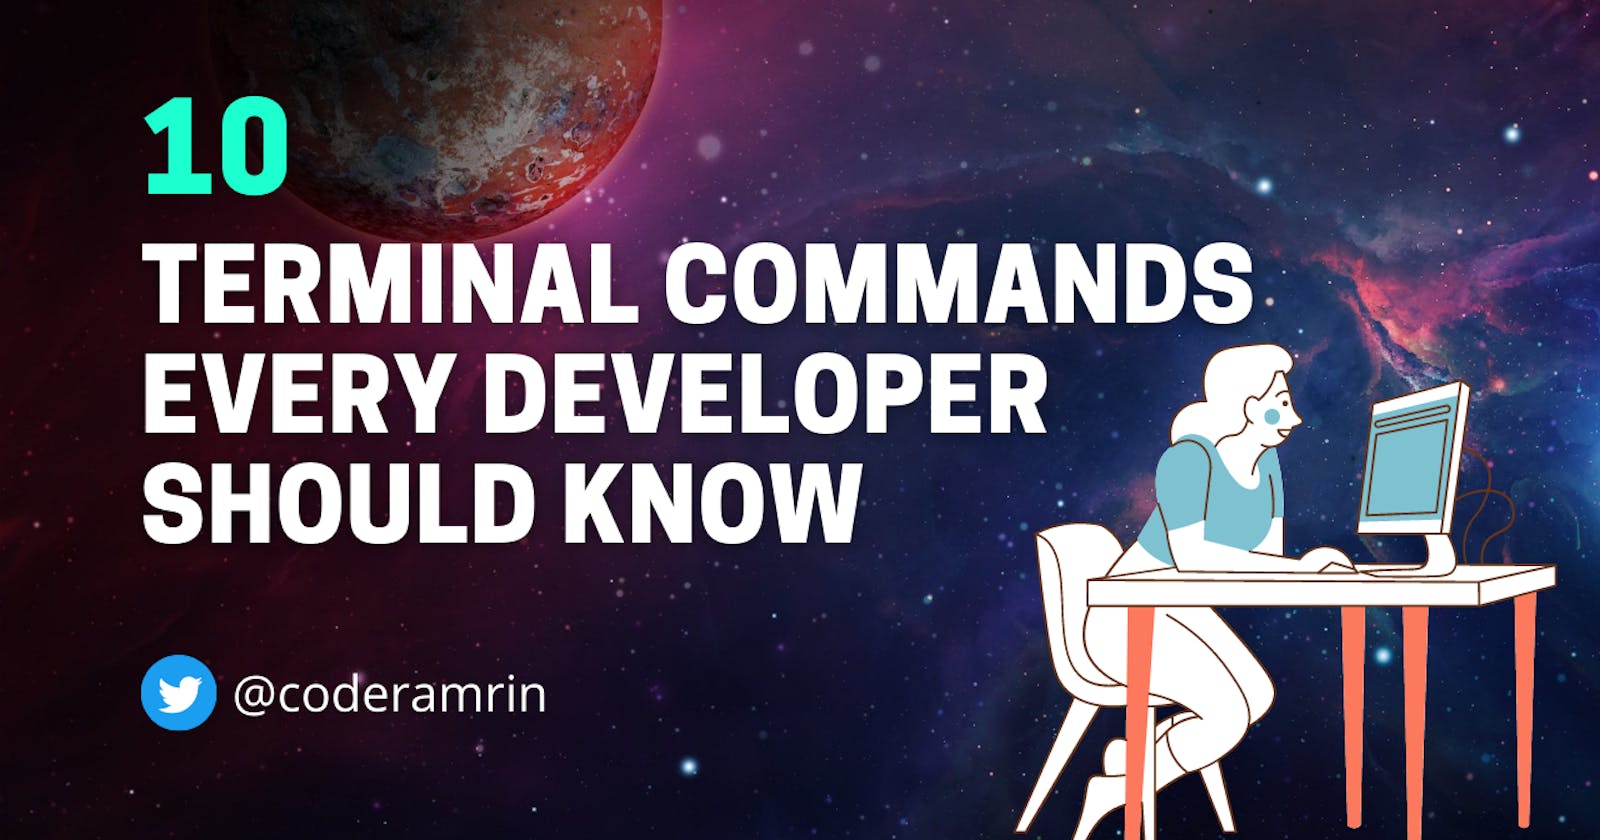 10 terminal commands every developer should know